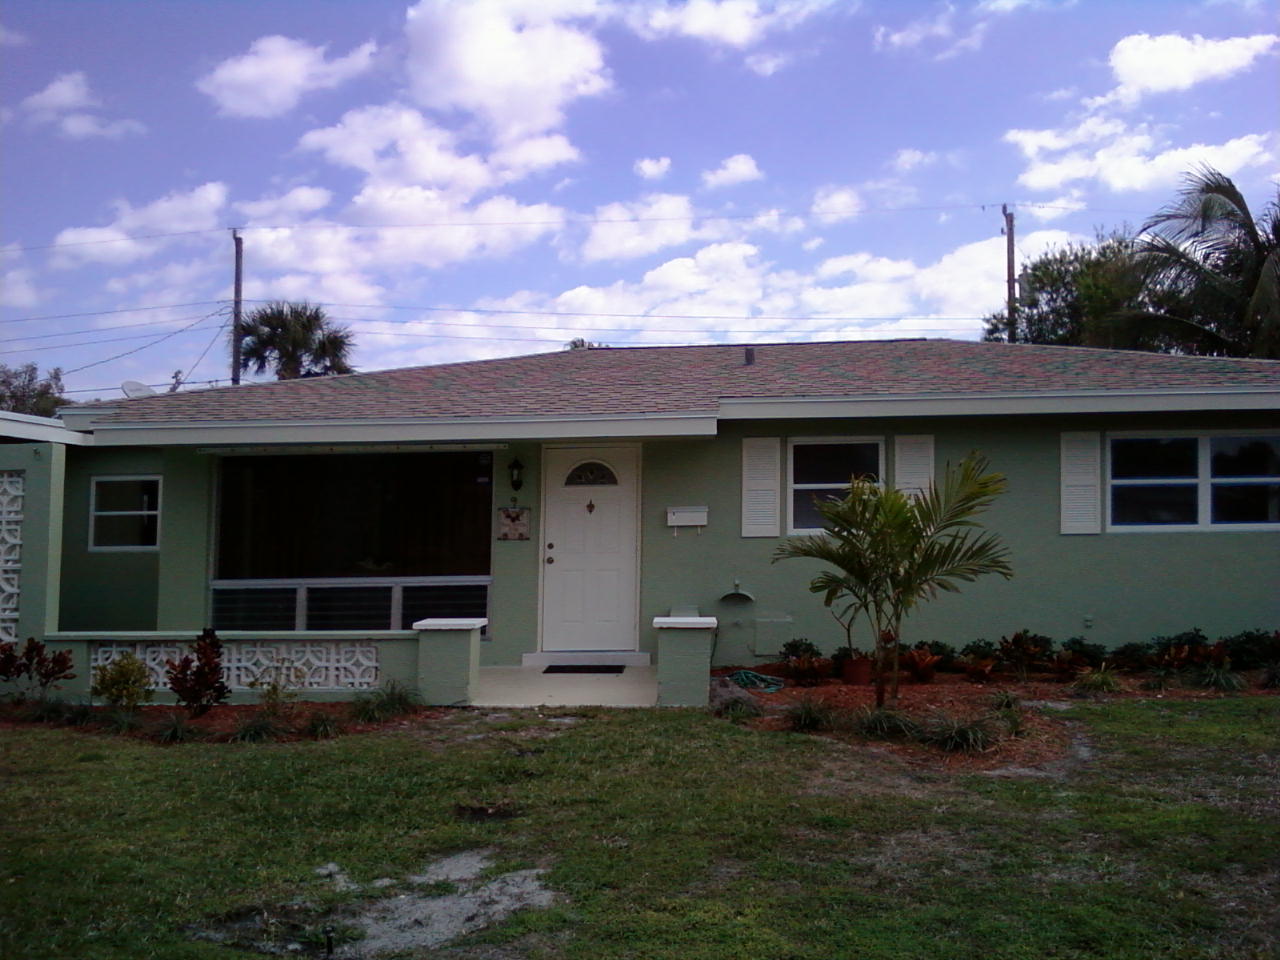 ABA Customs, Inc. 3 Dimensional Shingle Re-Roof Project in Royal Palm Beach, Florida!